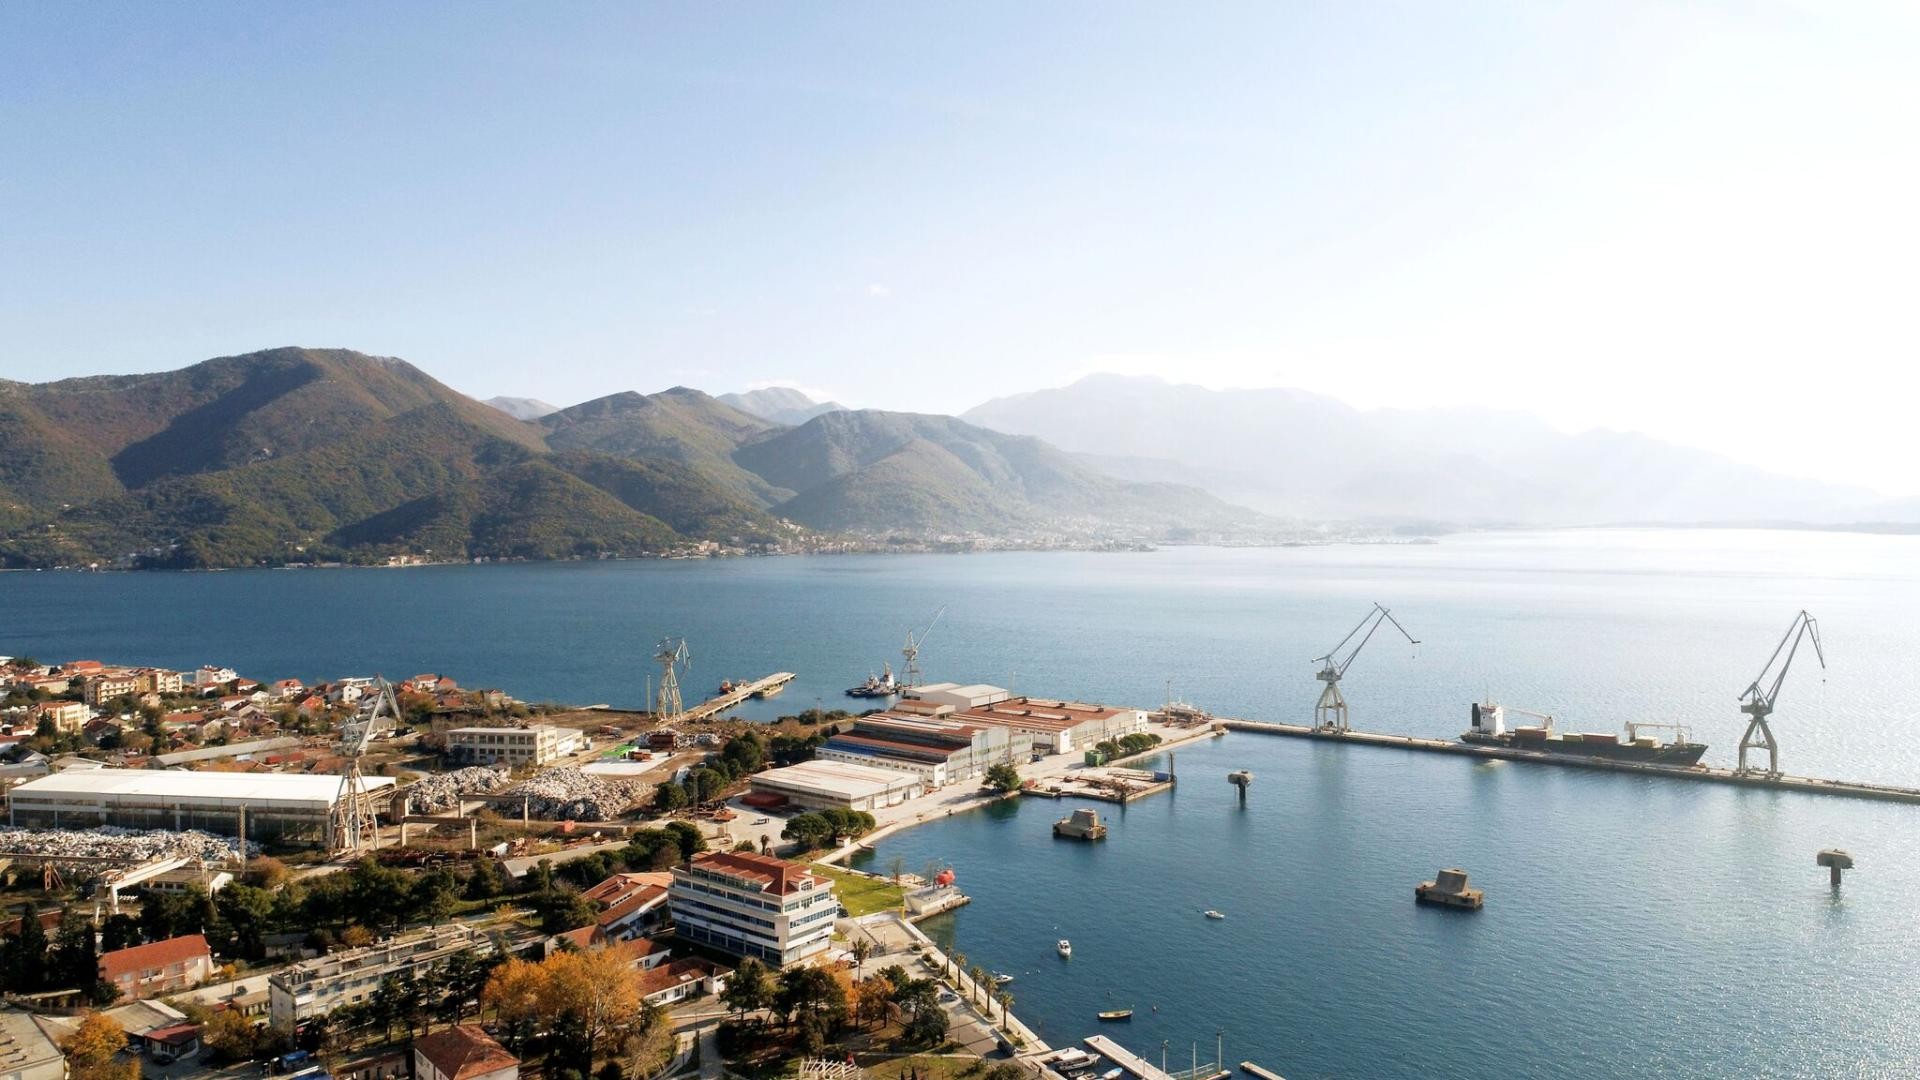 Damen, Adriatic Marinas and the Montenegrin Government sign contract for redevelopment of Bijela shipyard